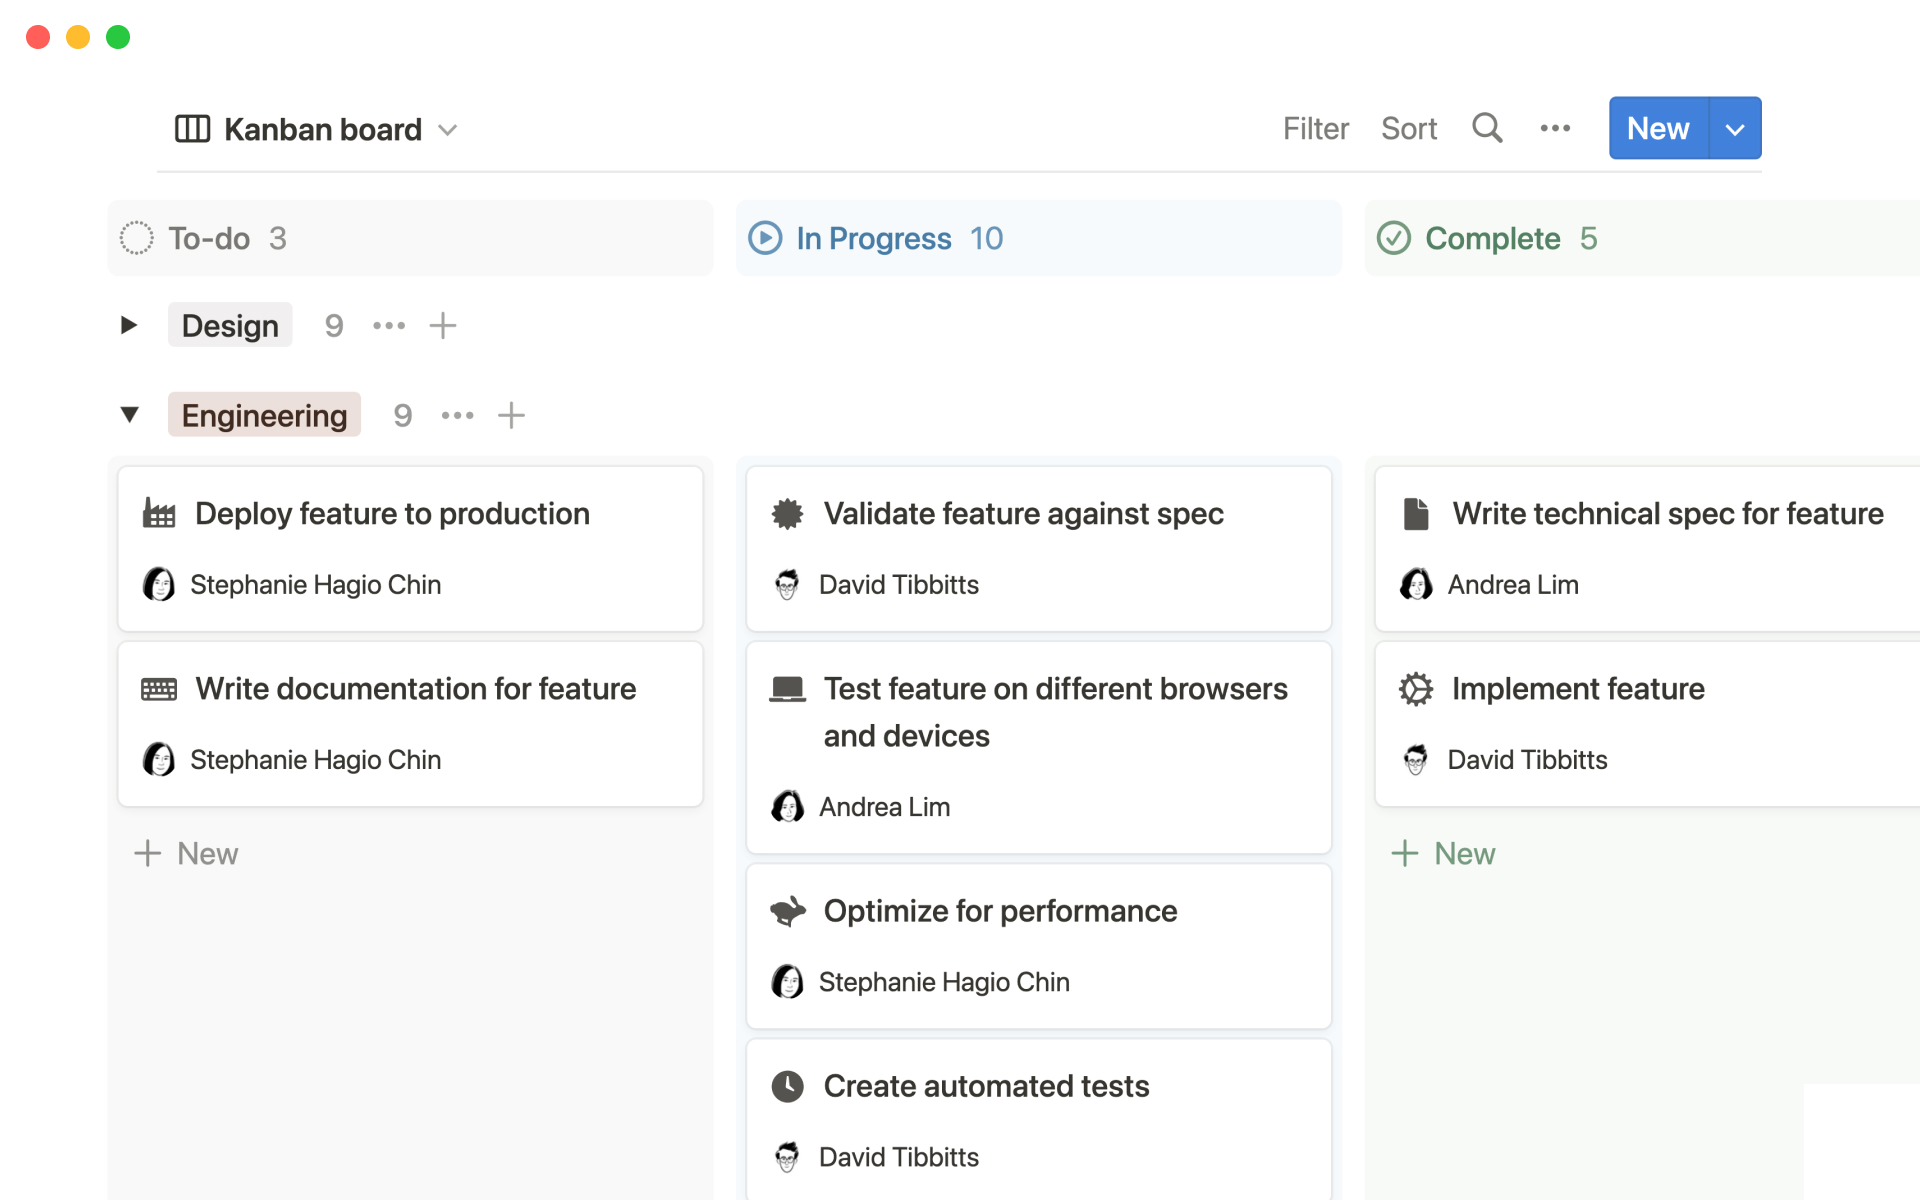 Helps design and engineering teams to organize and manage their projects and tasks.